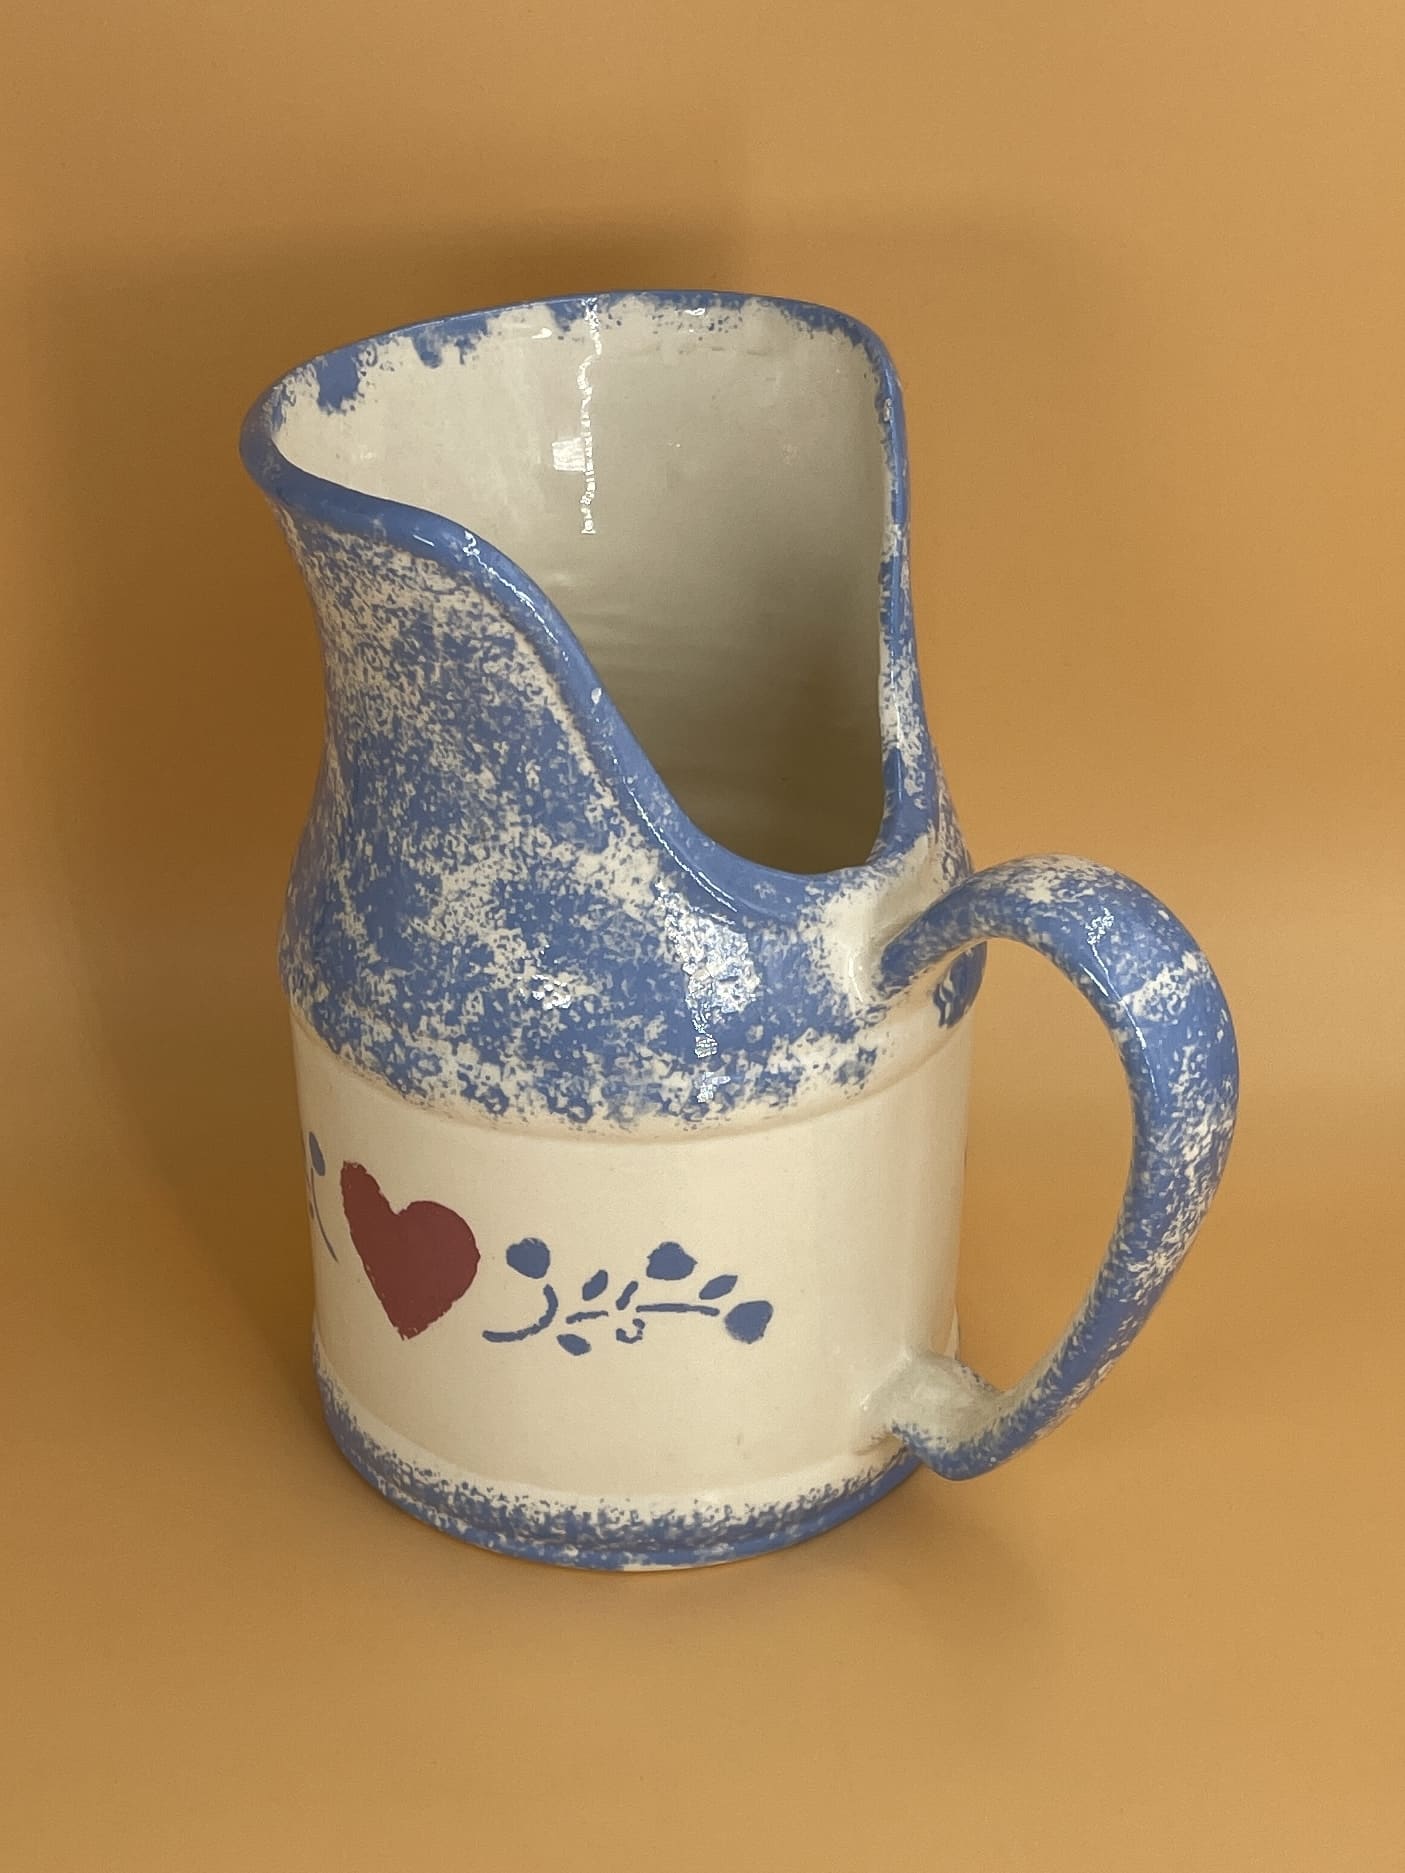 Vintage Blue and White Heart Pitcher